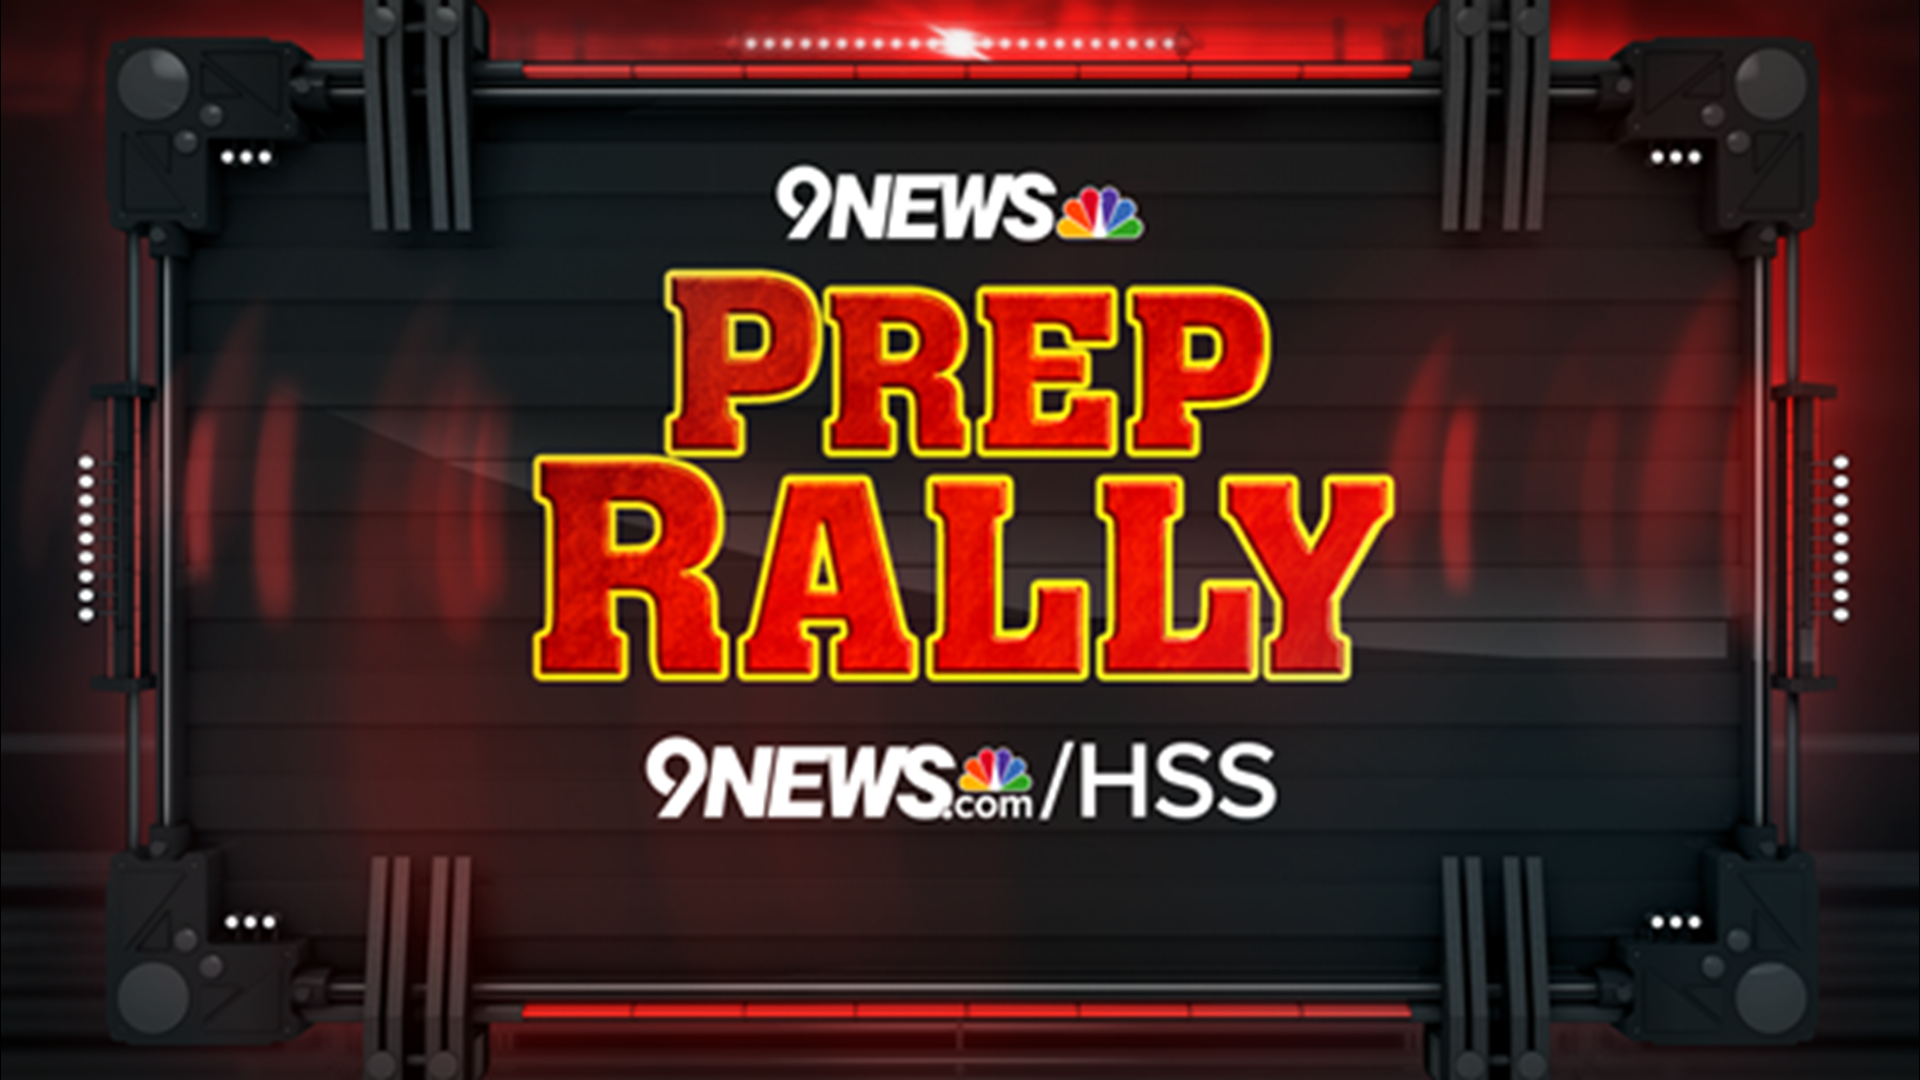 Watch the 9NEWS Prep Rally from Saturday morning, April 27.